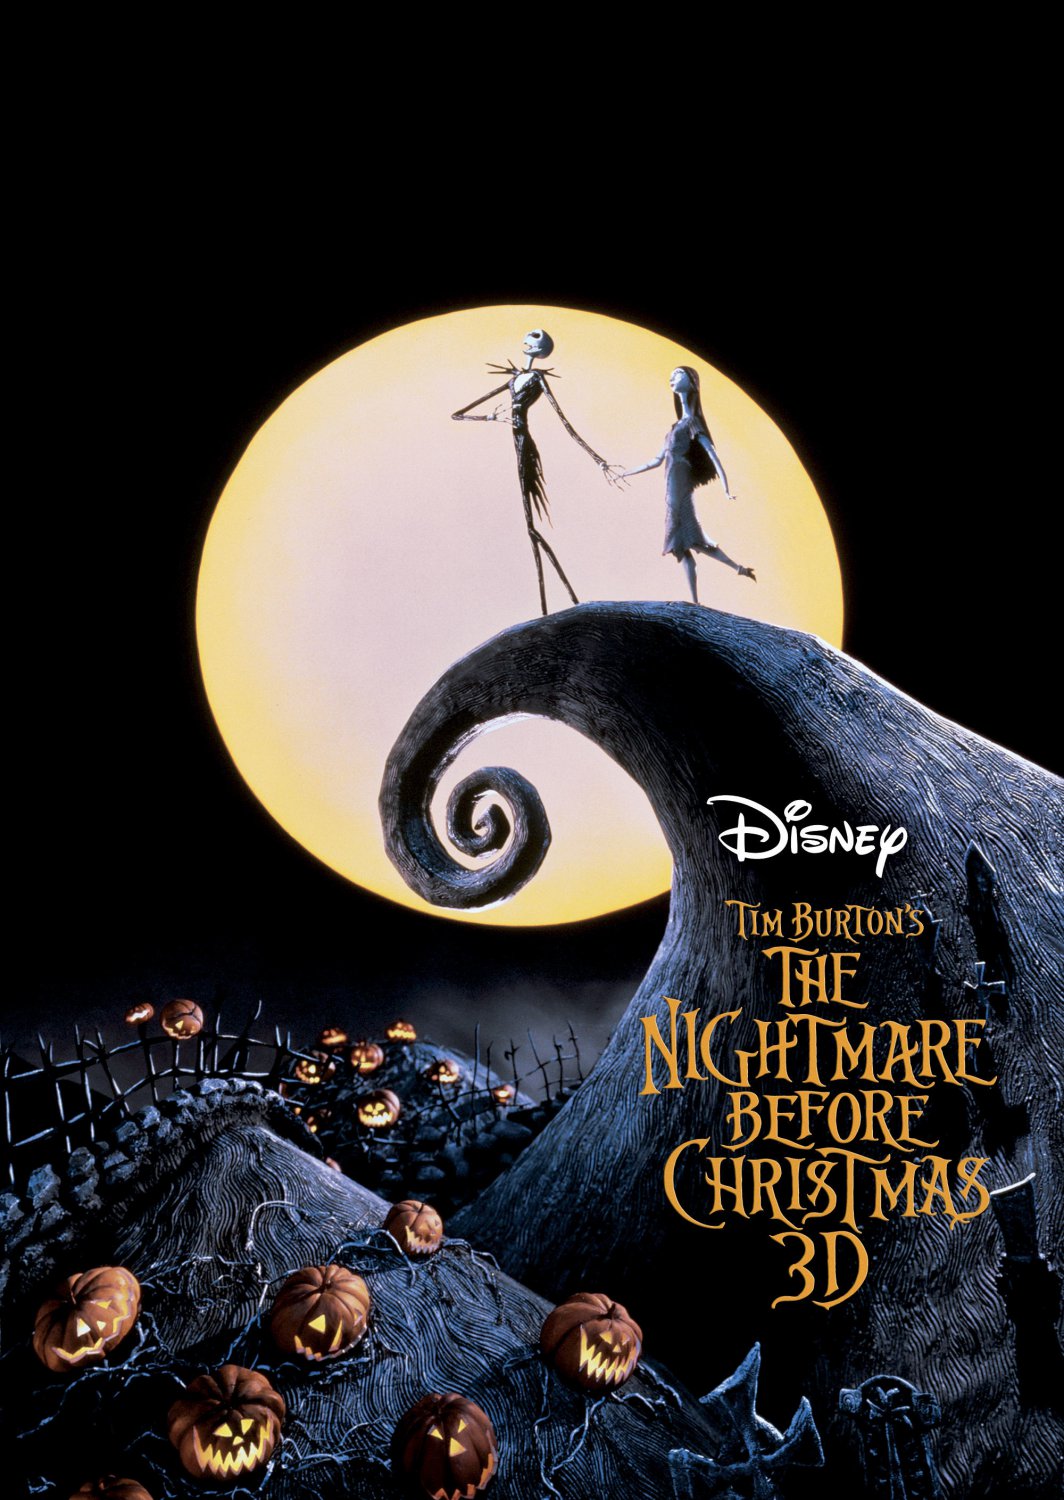 The Burton's Nightmare Before Christmas 13"x19" (32cm/49cm) Polyester Fabric Poster